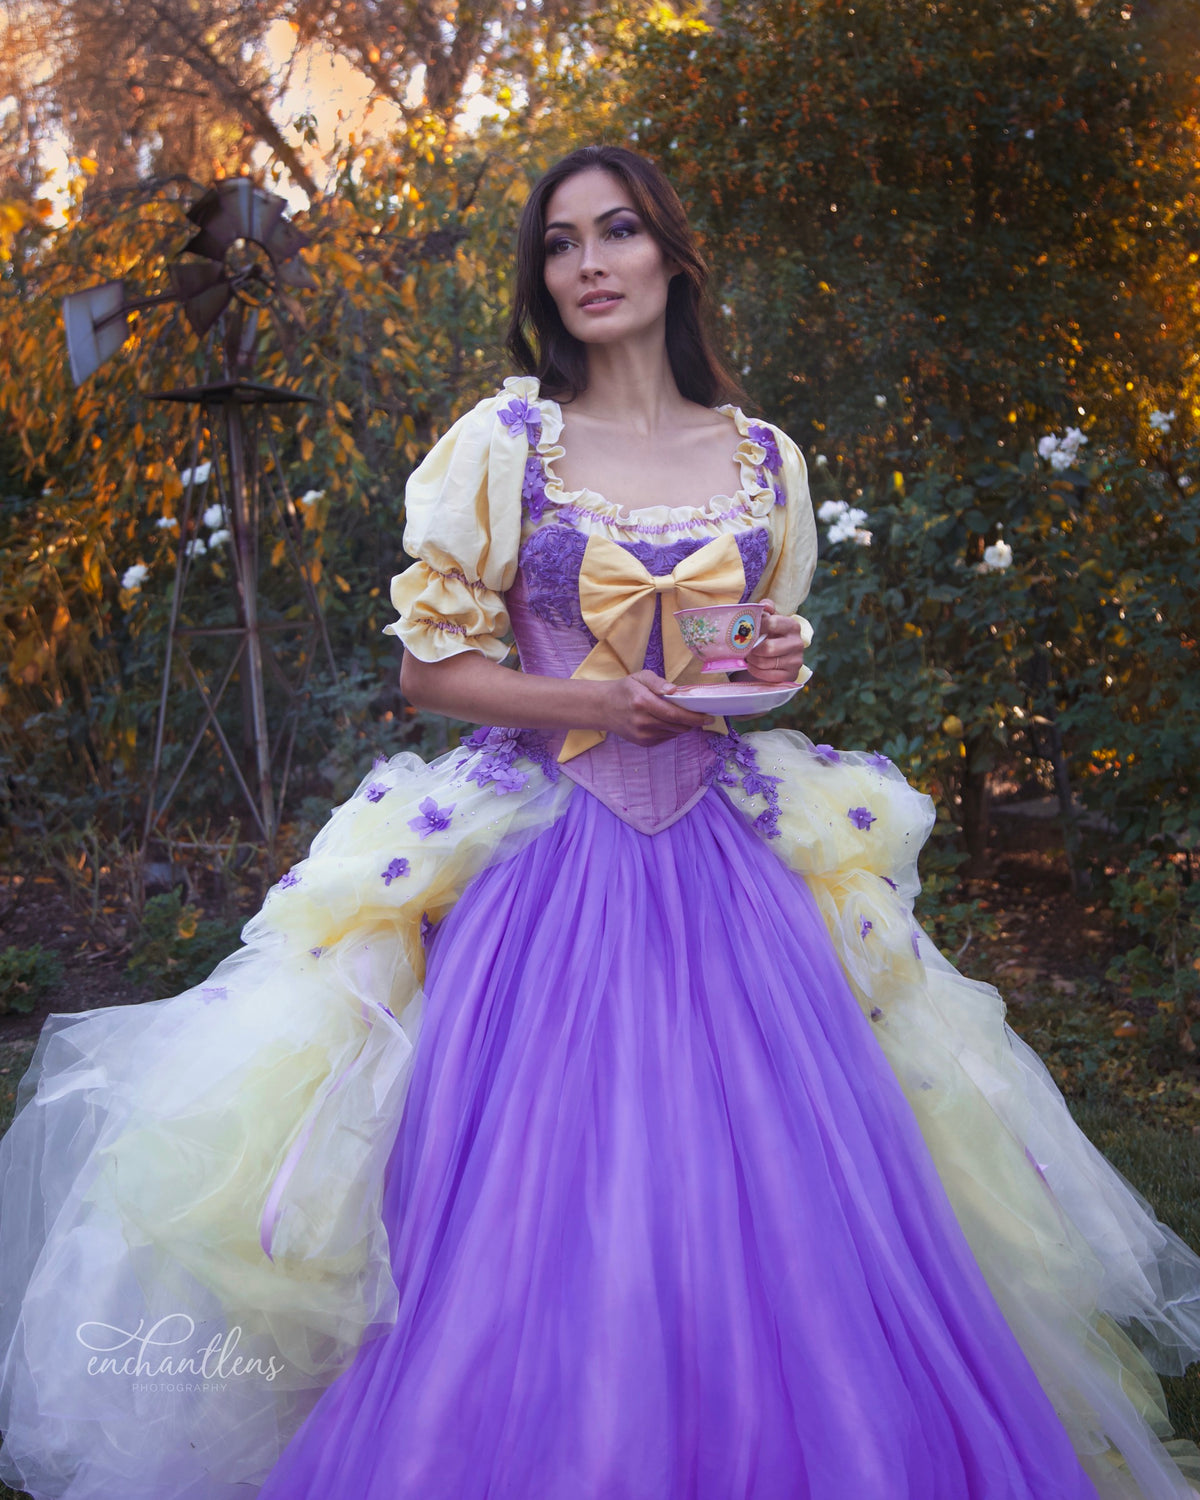 Lilac and Yellow Tea Party Gown - One of A Kind - Sample Sale